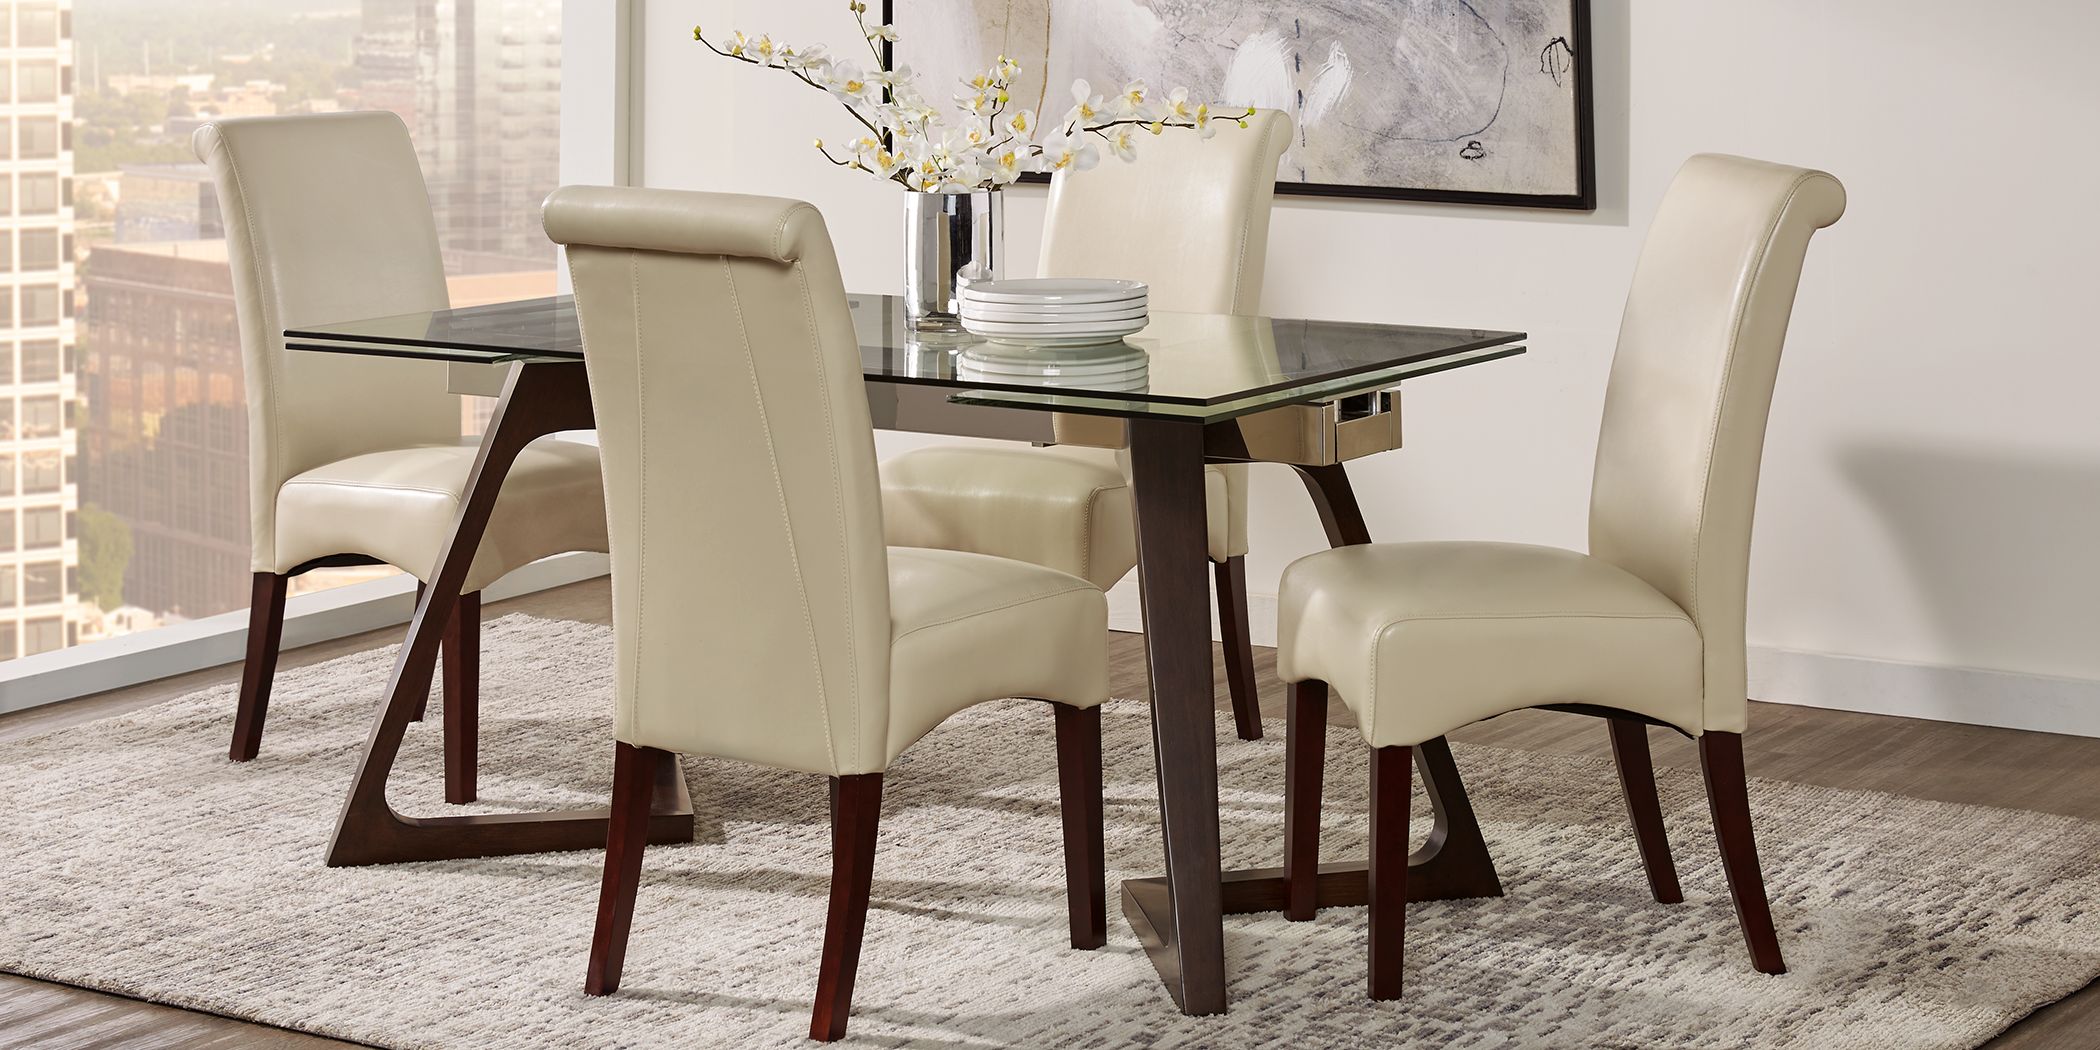 ivory chairs in dining room